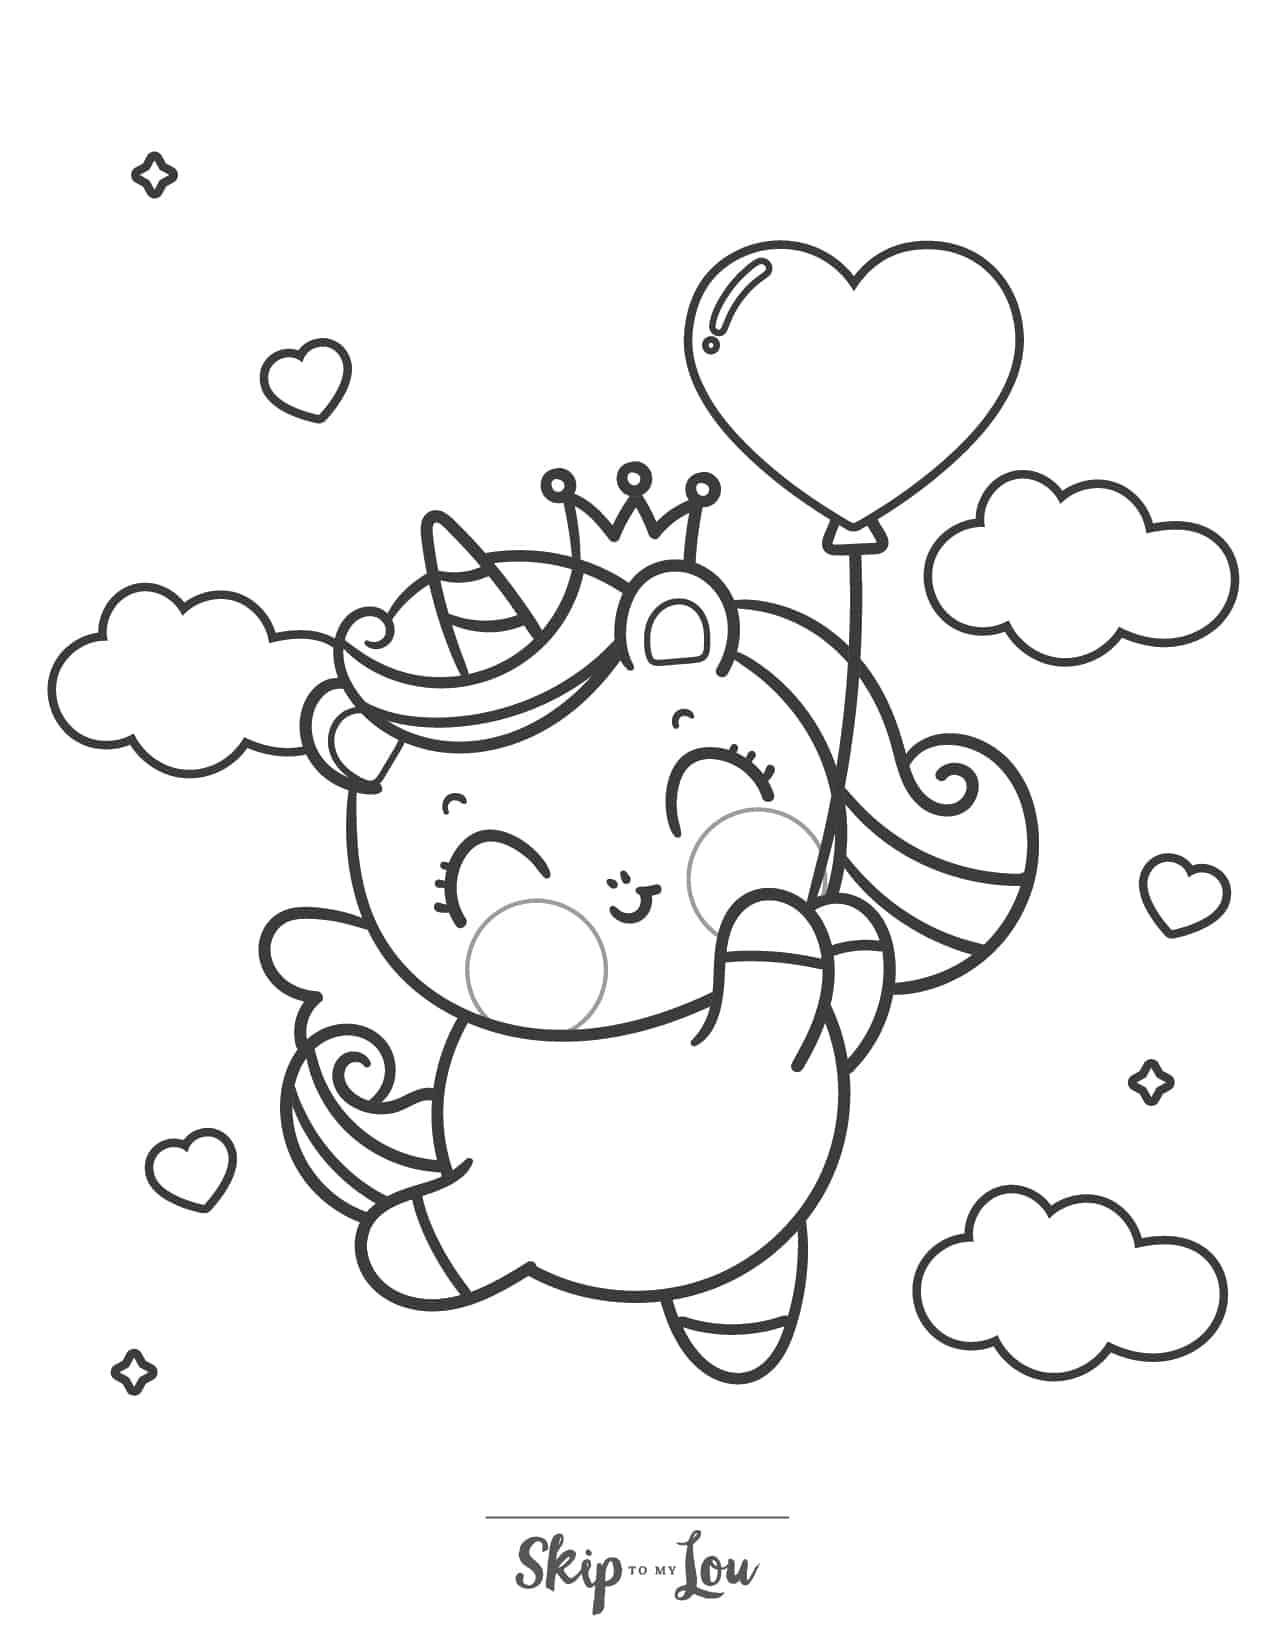 12 Free Printable Cute Coloring Pages | Skip To My Lou